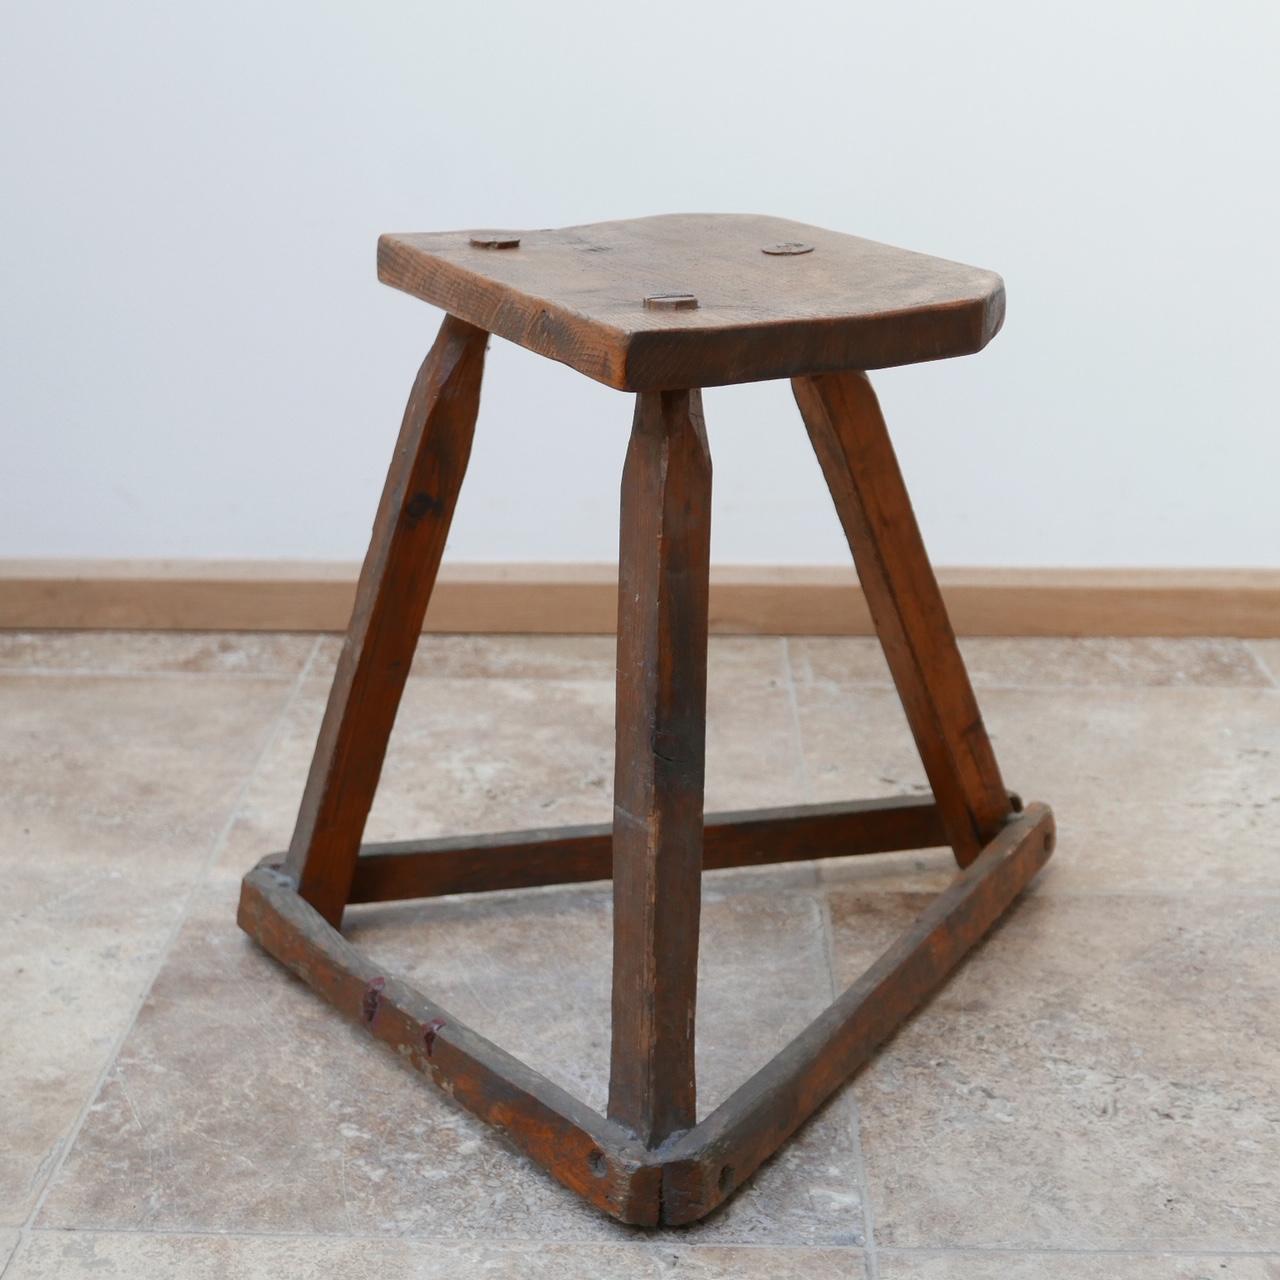 British Antique English Wooden Cutler's Stool or Side Table 'No.1'